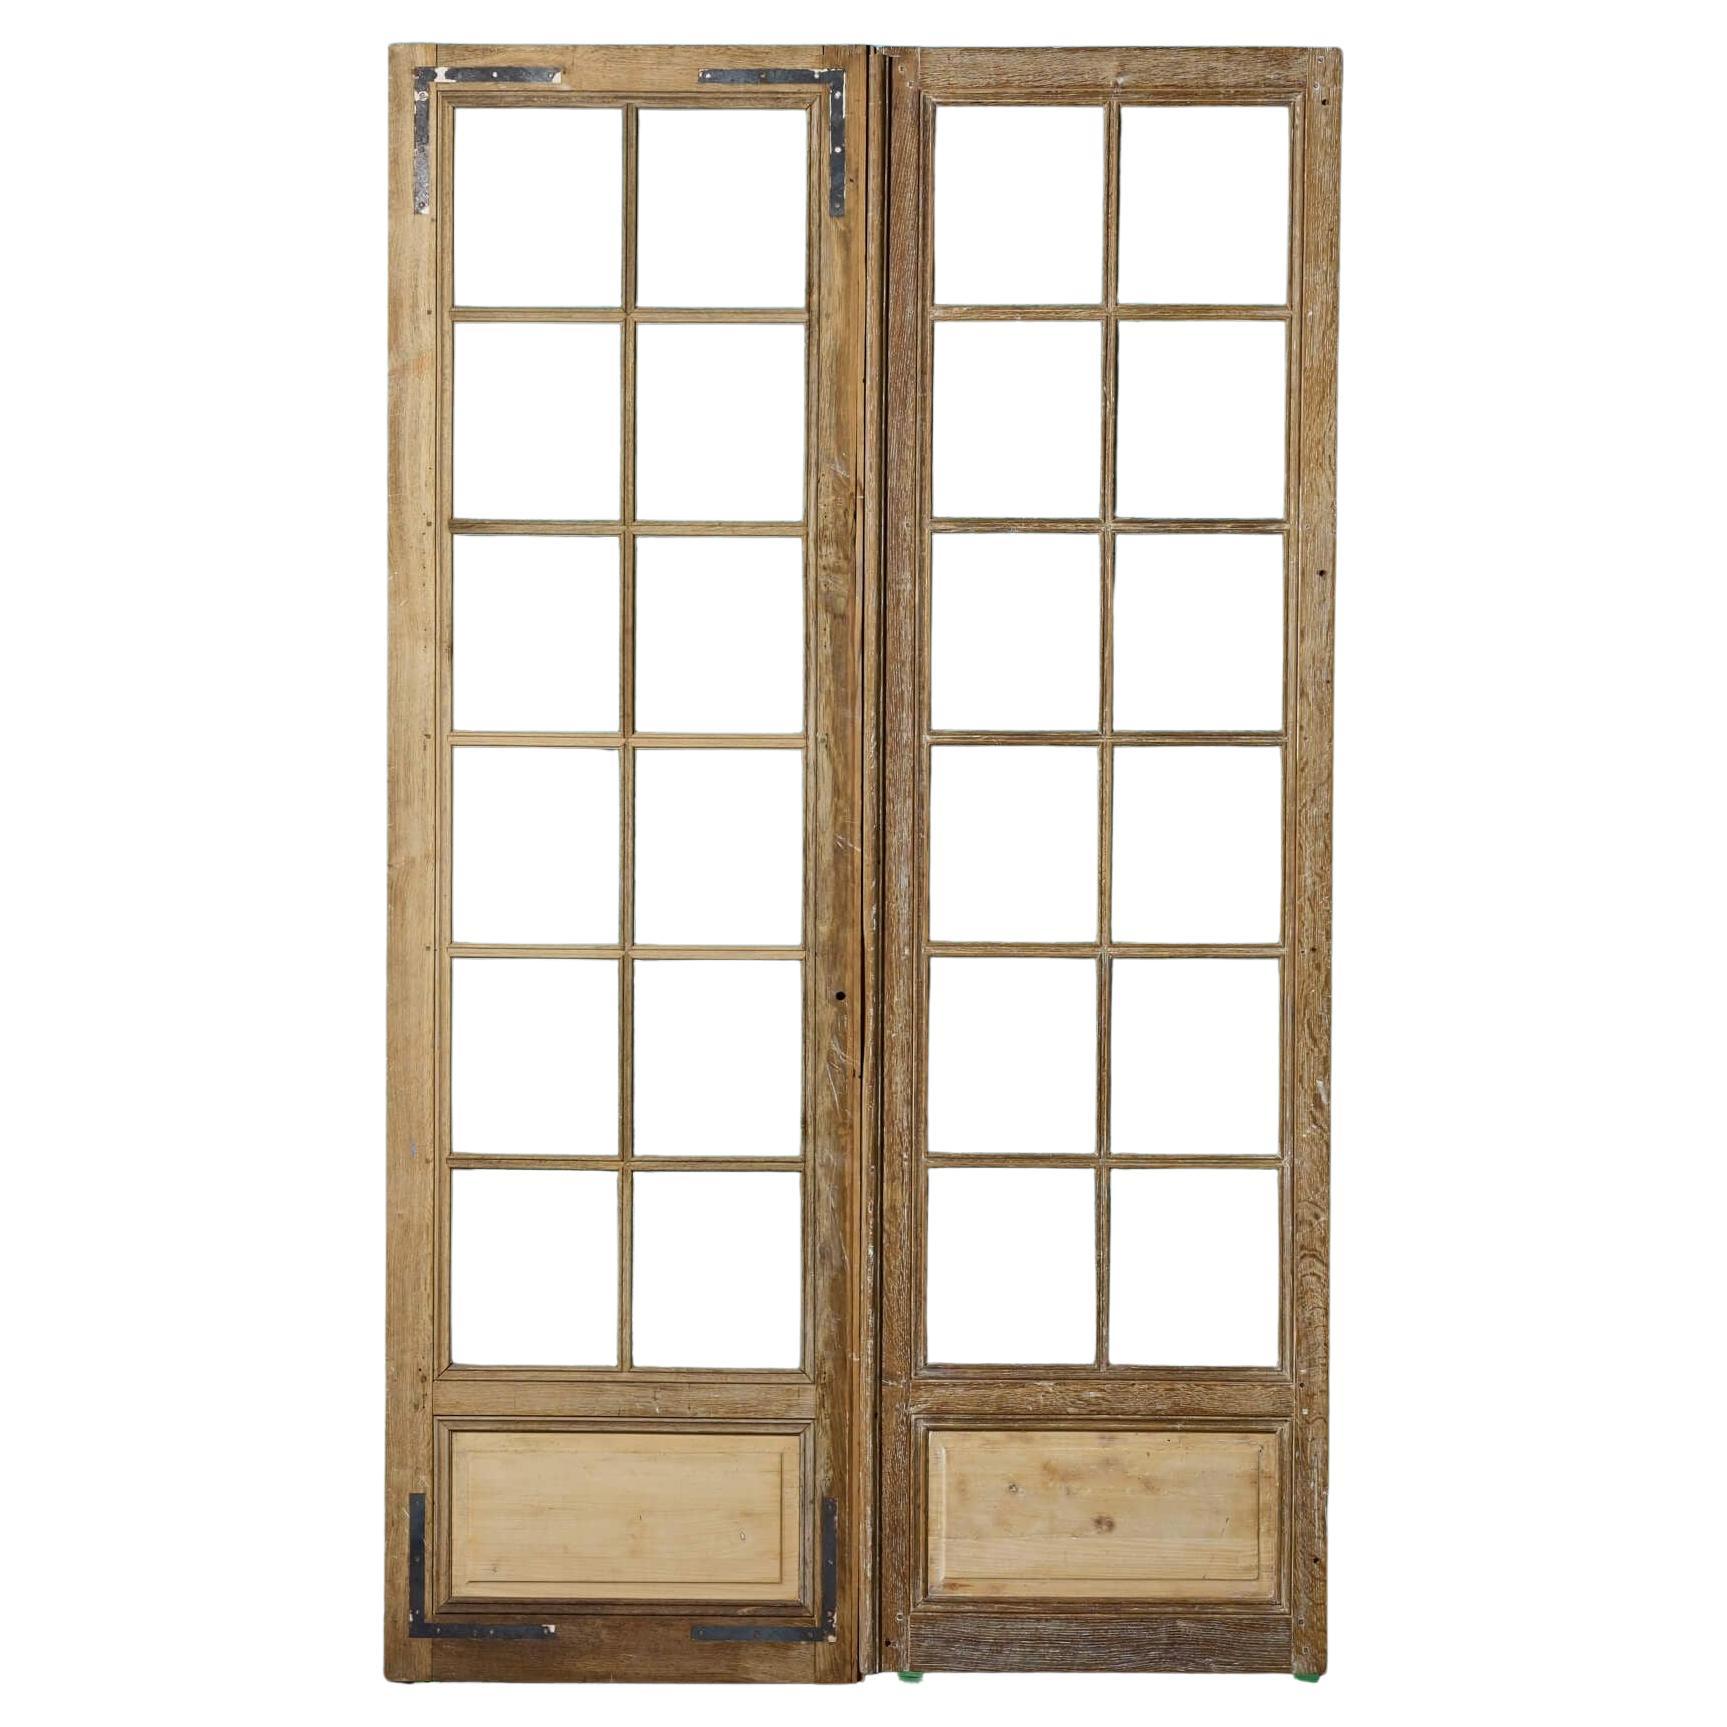 Very Tall Set of Antique Oak Doors for Glazing